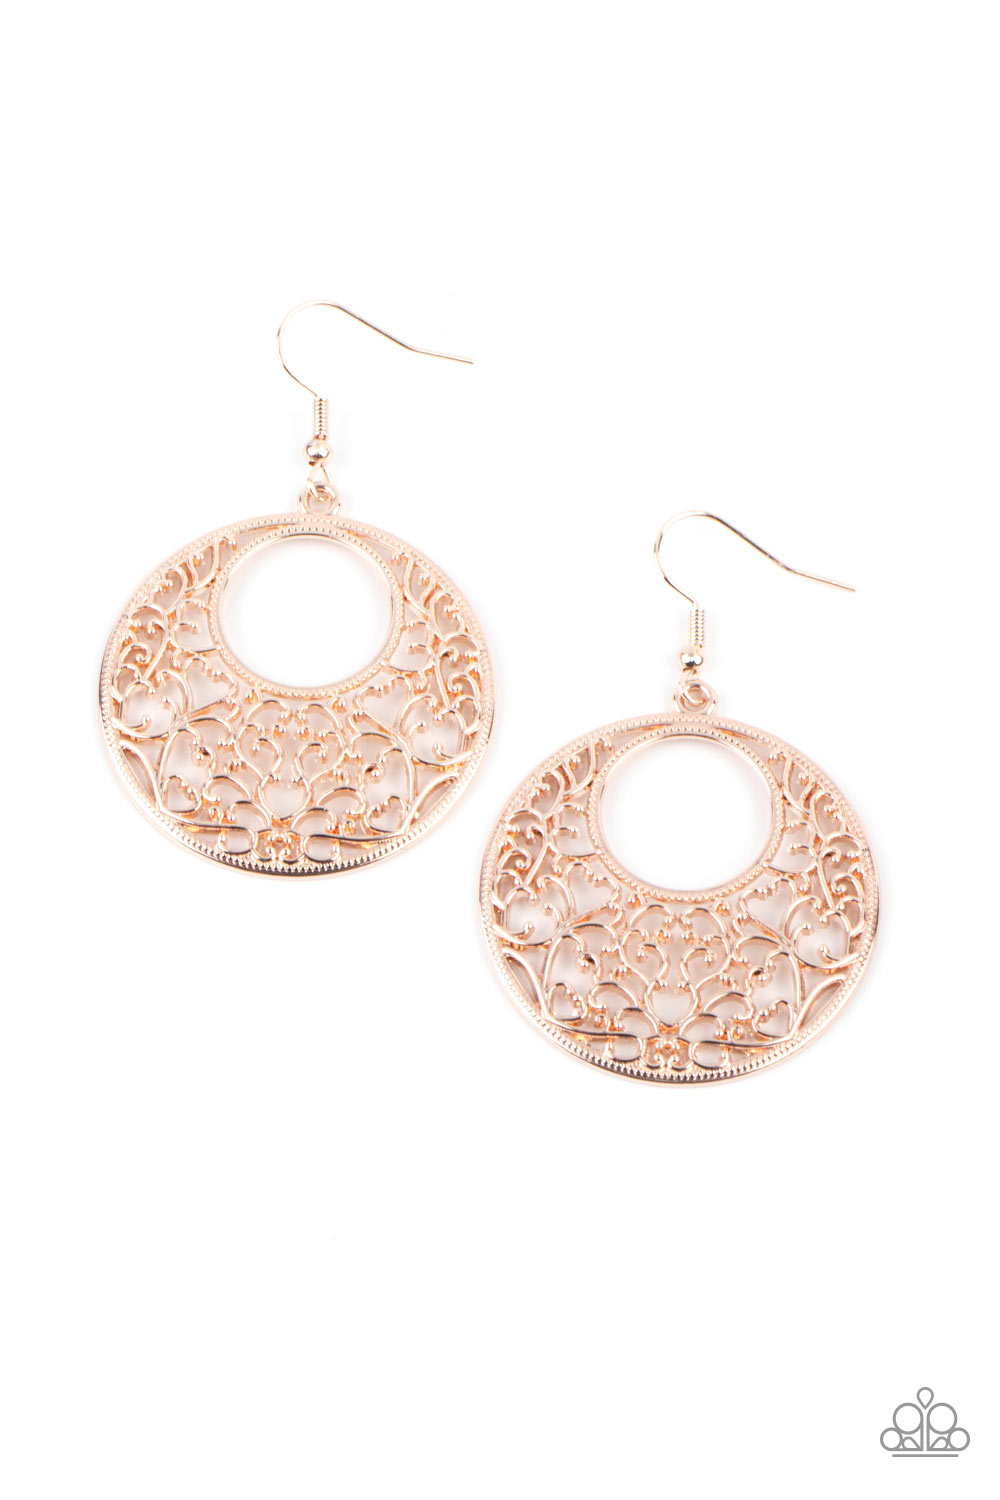 Vineyard Romance - Rose Gold Filigree Earrings shimmery vine-like rose gold filigree climbs the inside of a studded circular frame, creating a whimsical centerpiece. Earring attaches to a standard fishhook fitting.  Sold as one pair of earrings.